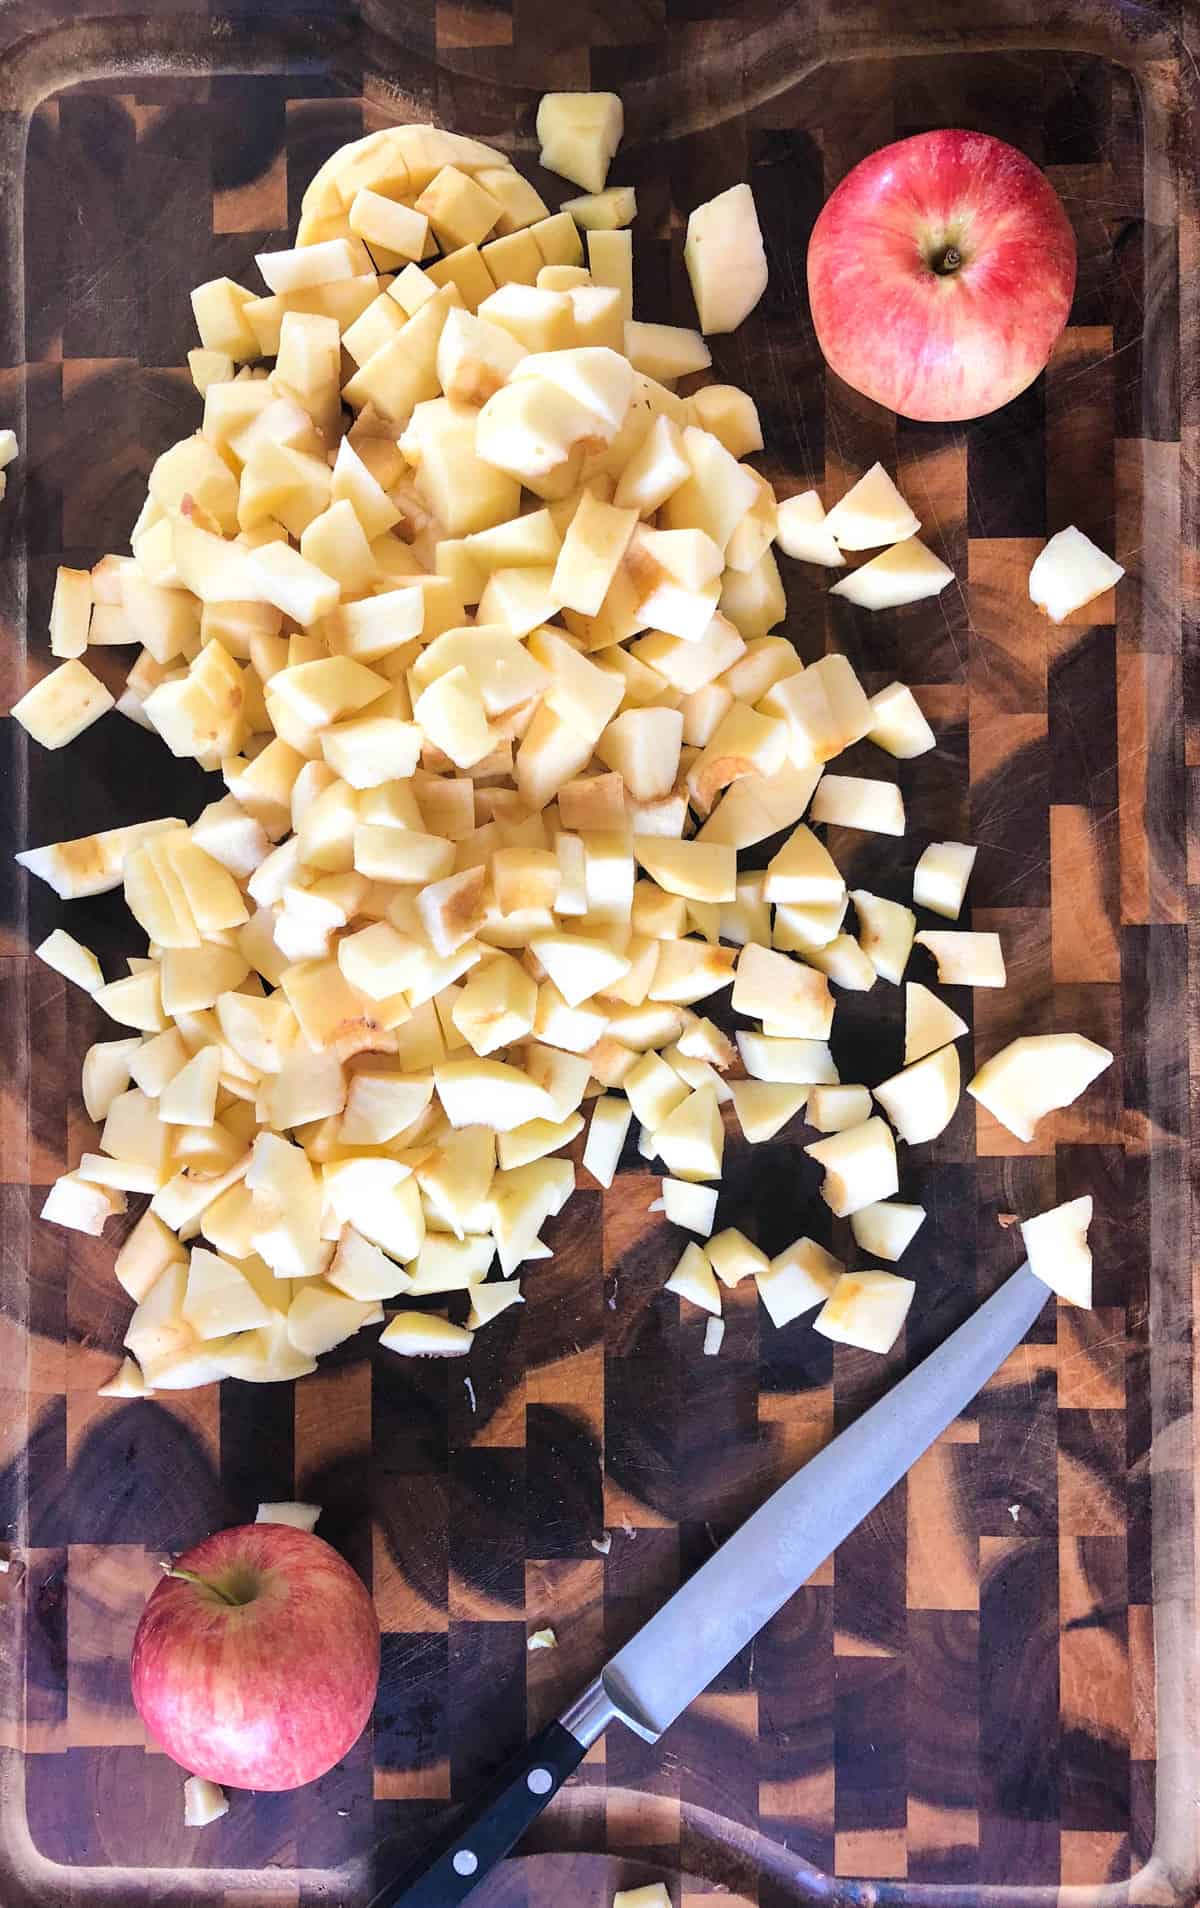 Chop the apples into similar sized pieces.